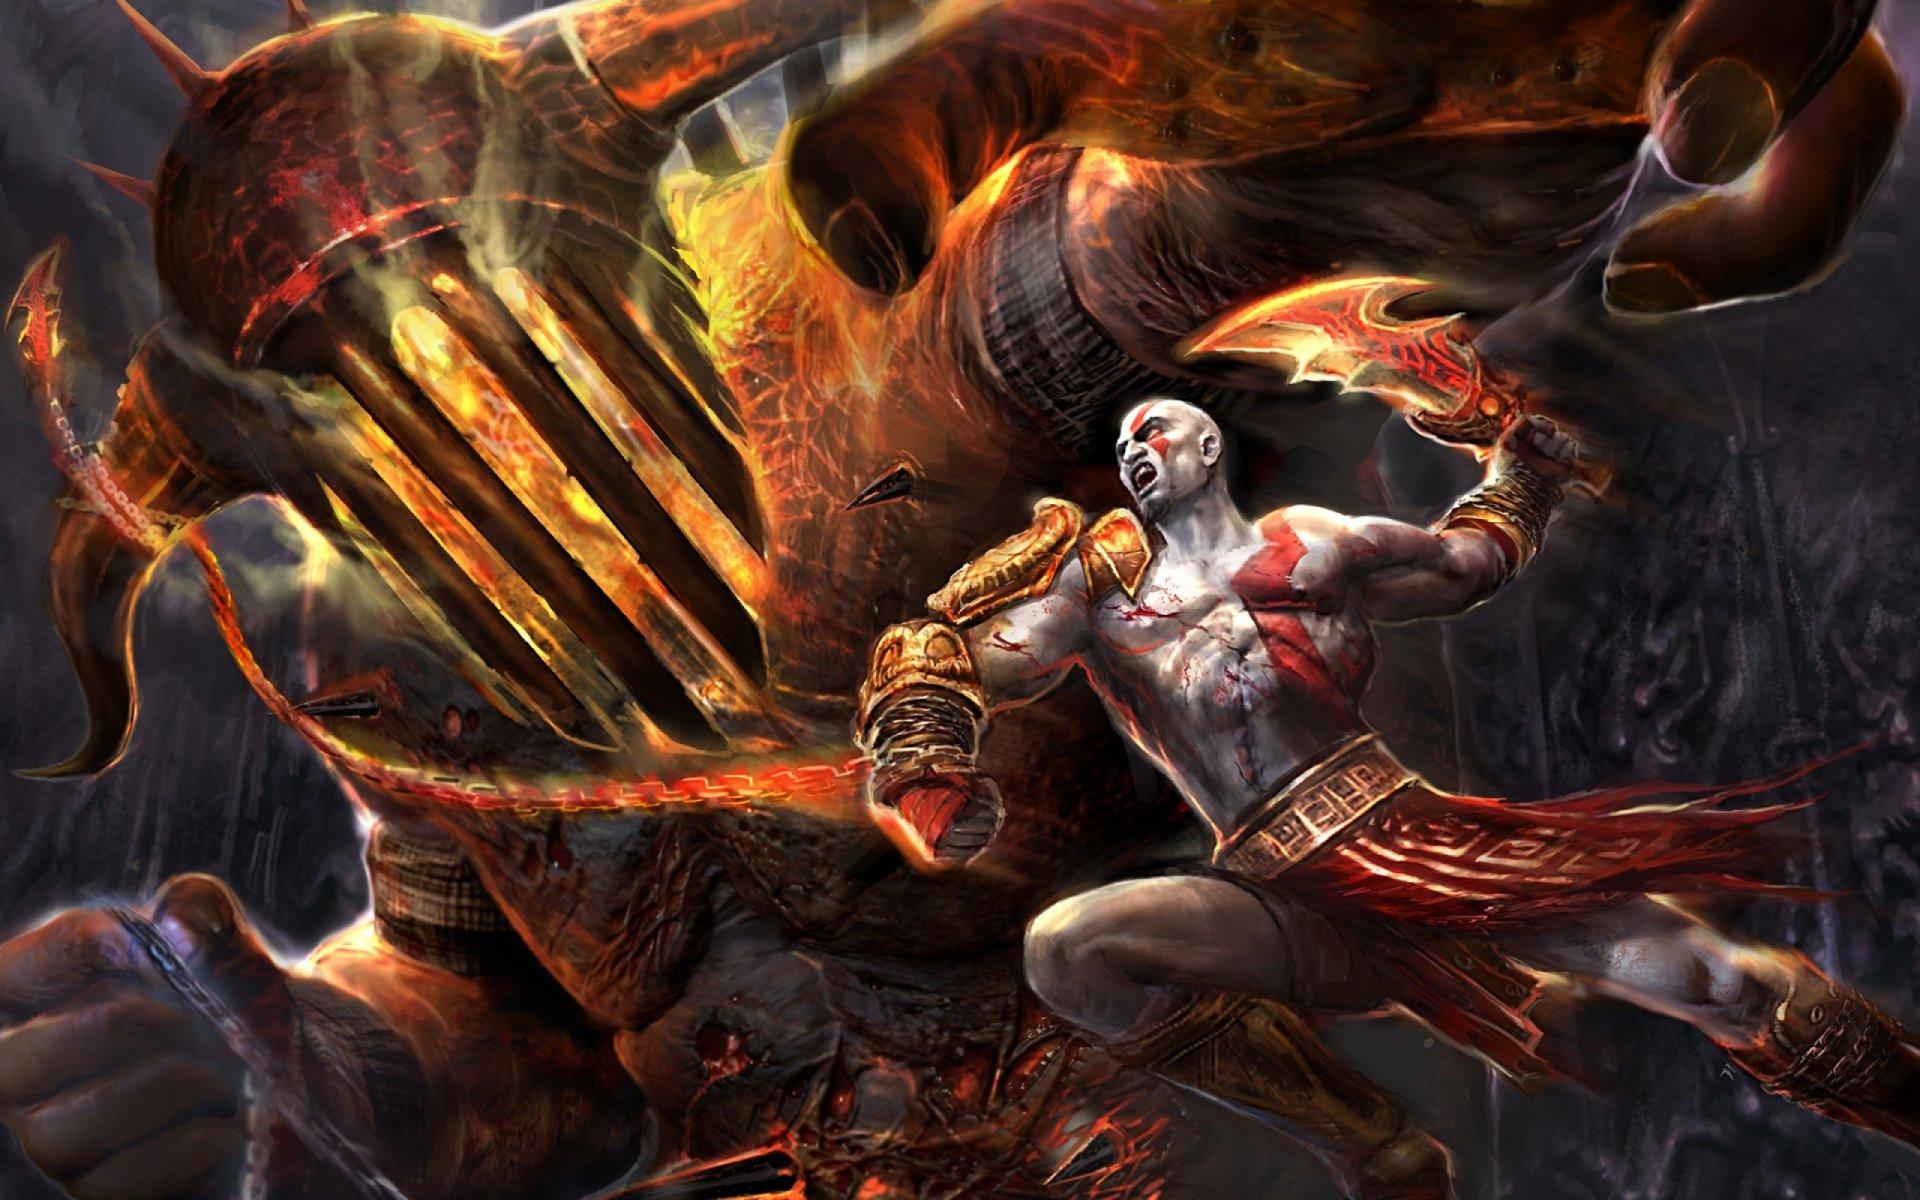 Finally finished my Hades x God of War crossover fanart! Just had